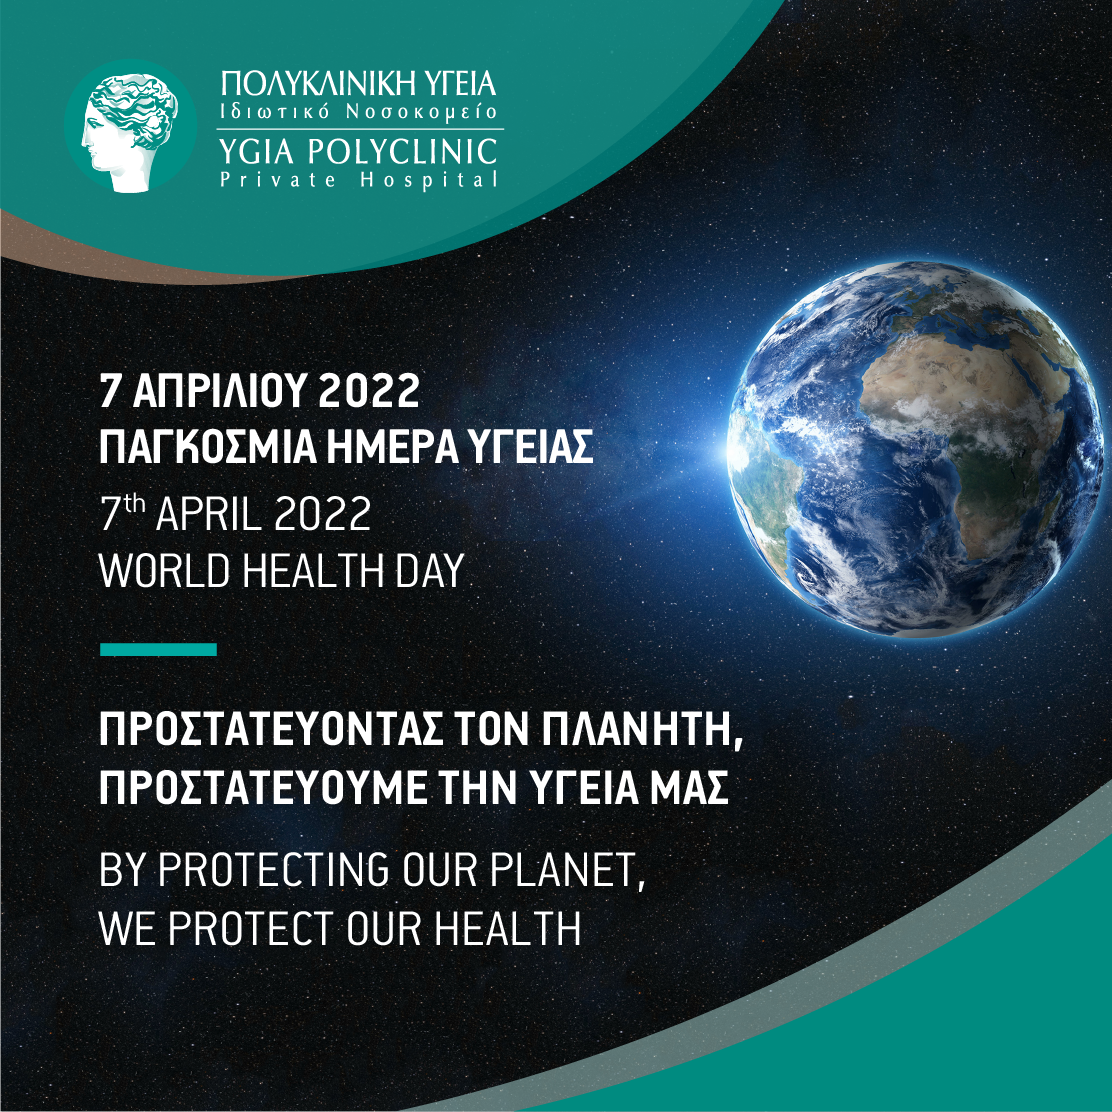 WORLD HEALTH DAY – 7TH APRIL 2022 BY PROTECTING OUR PLANET, WE PROTECT OUR HEALTH